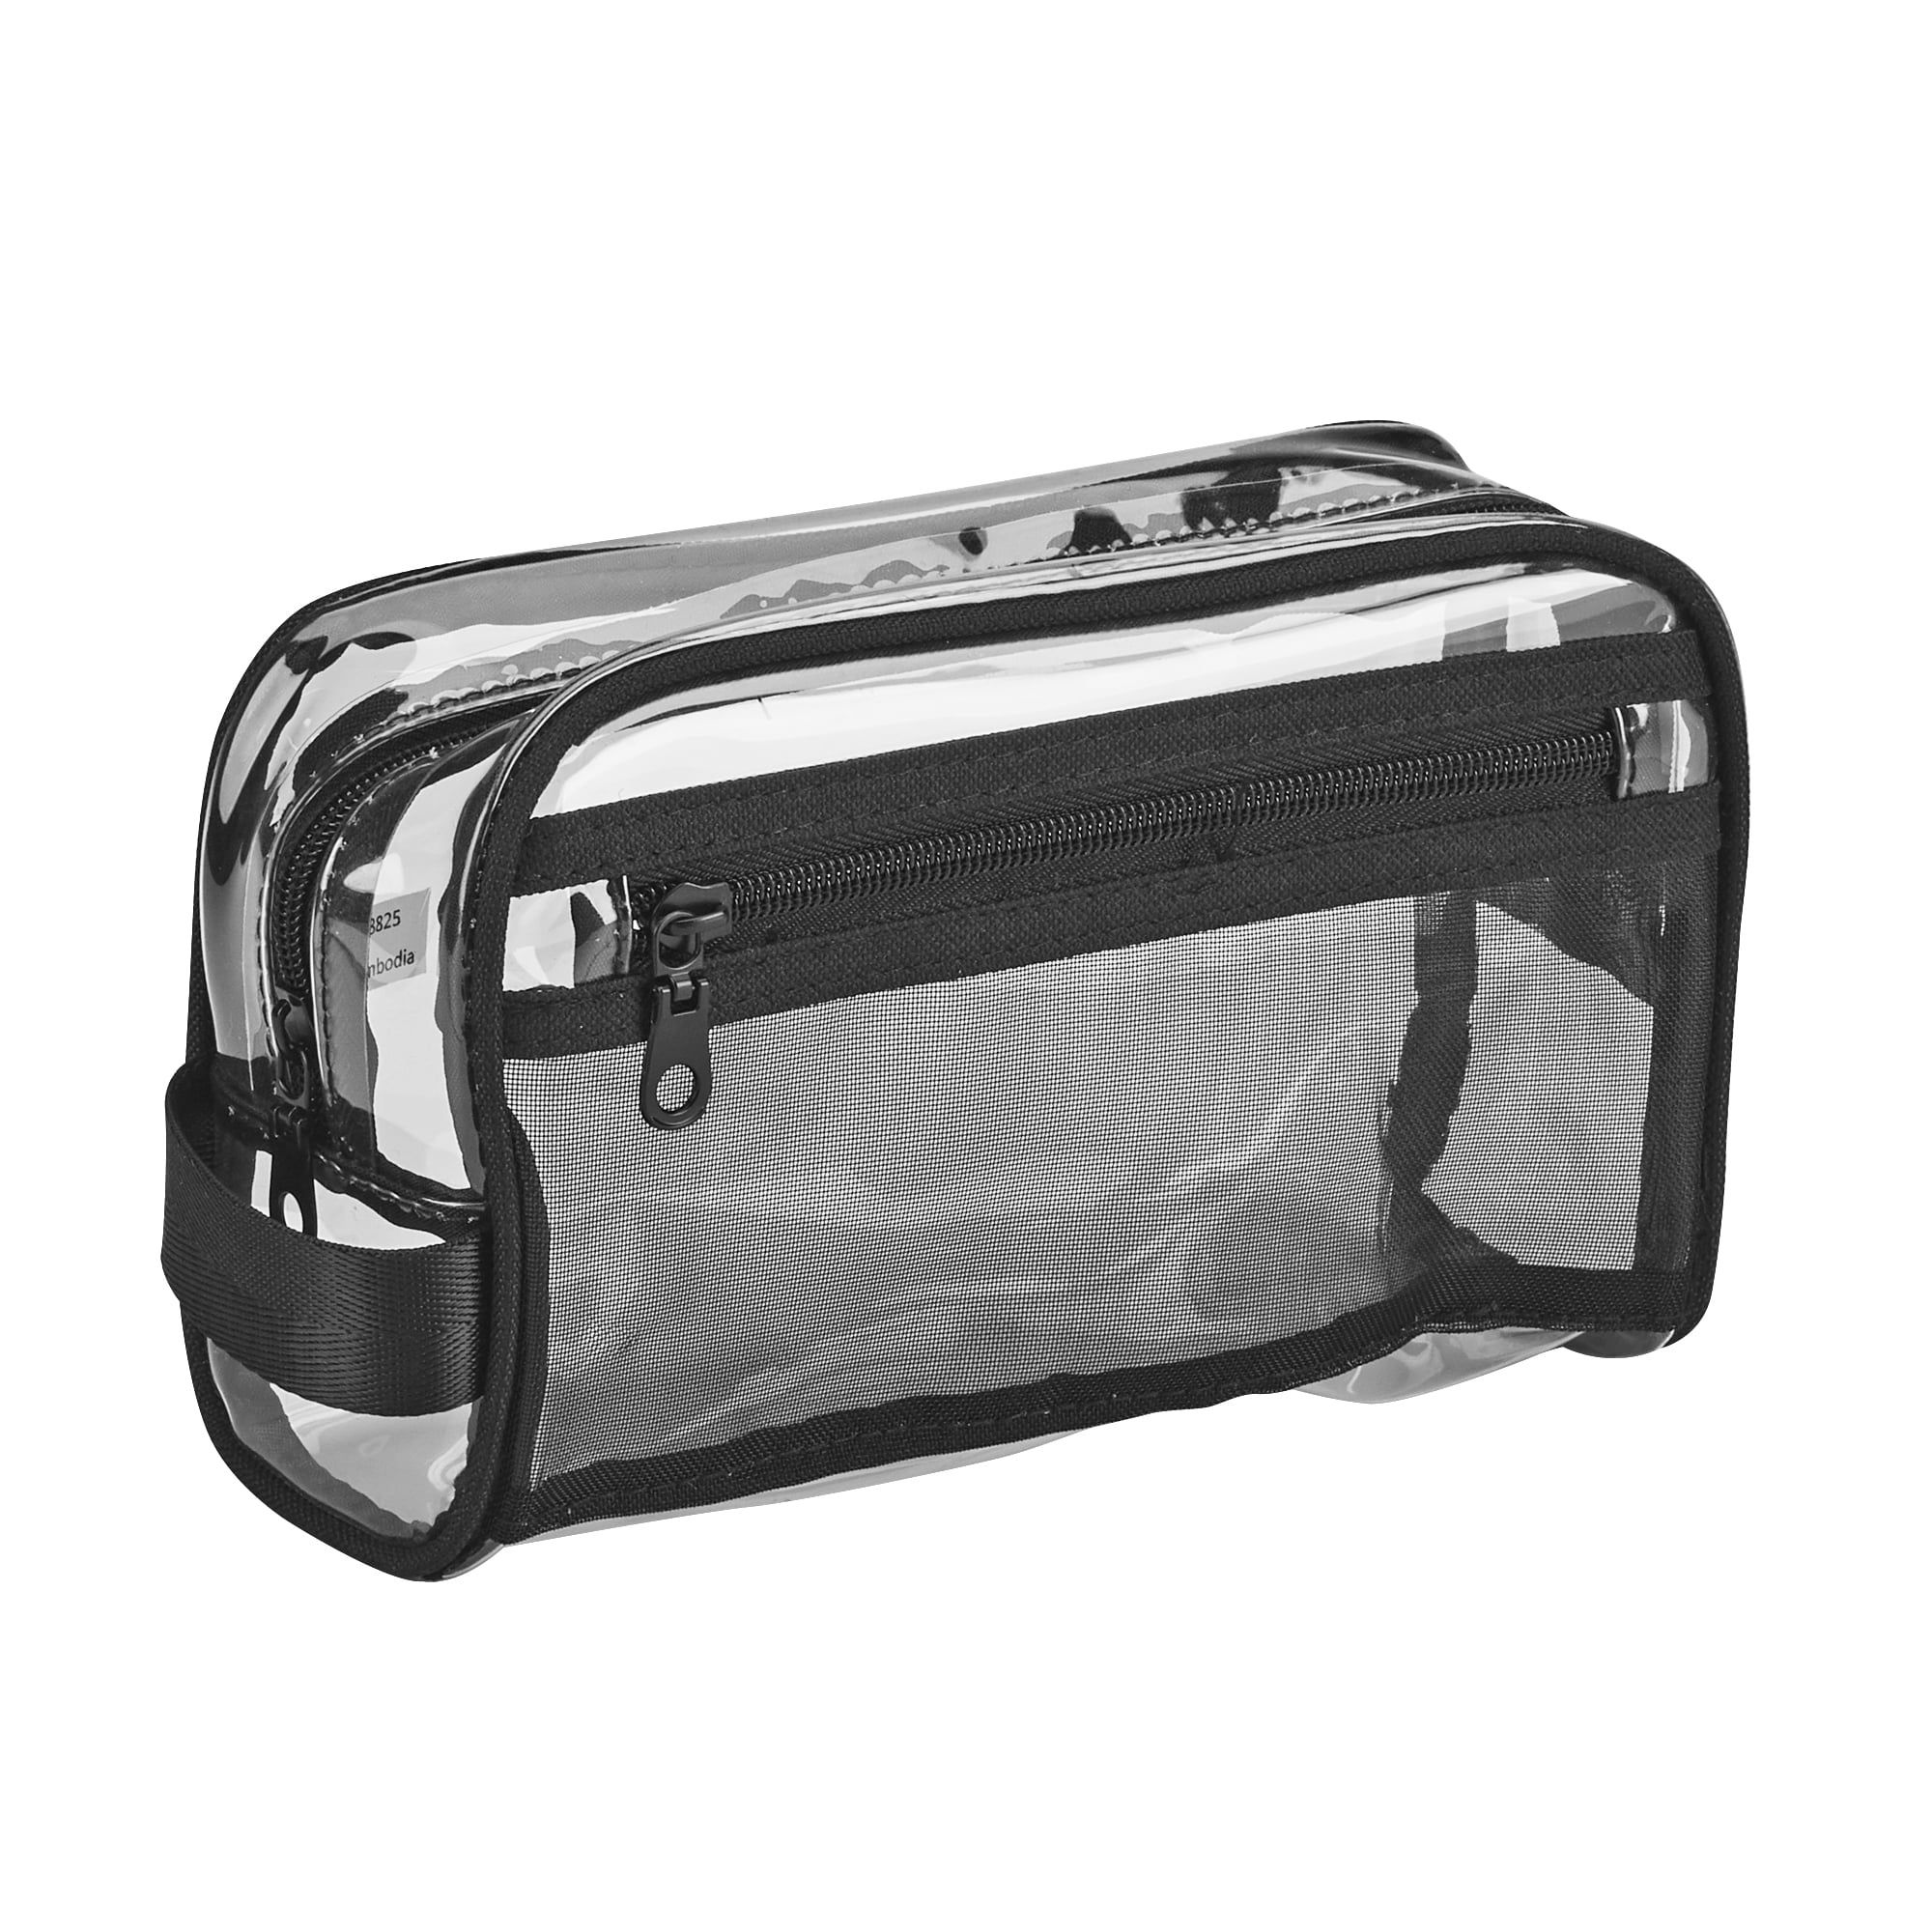 Basics Transparent PVC with Black Webbed Handle & Piping with Easy Access Side Pocket | Walmart (US)